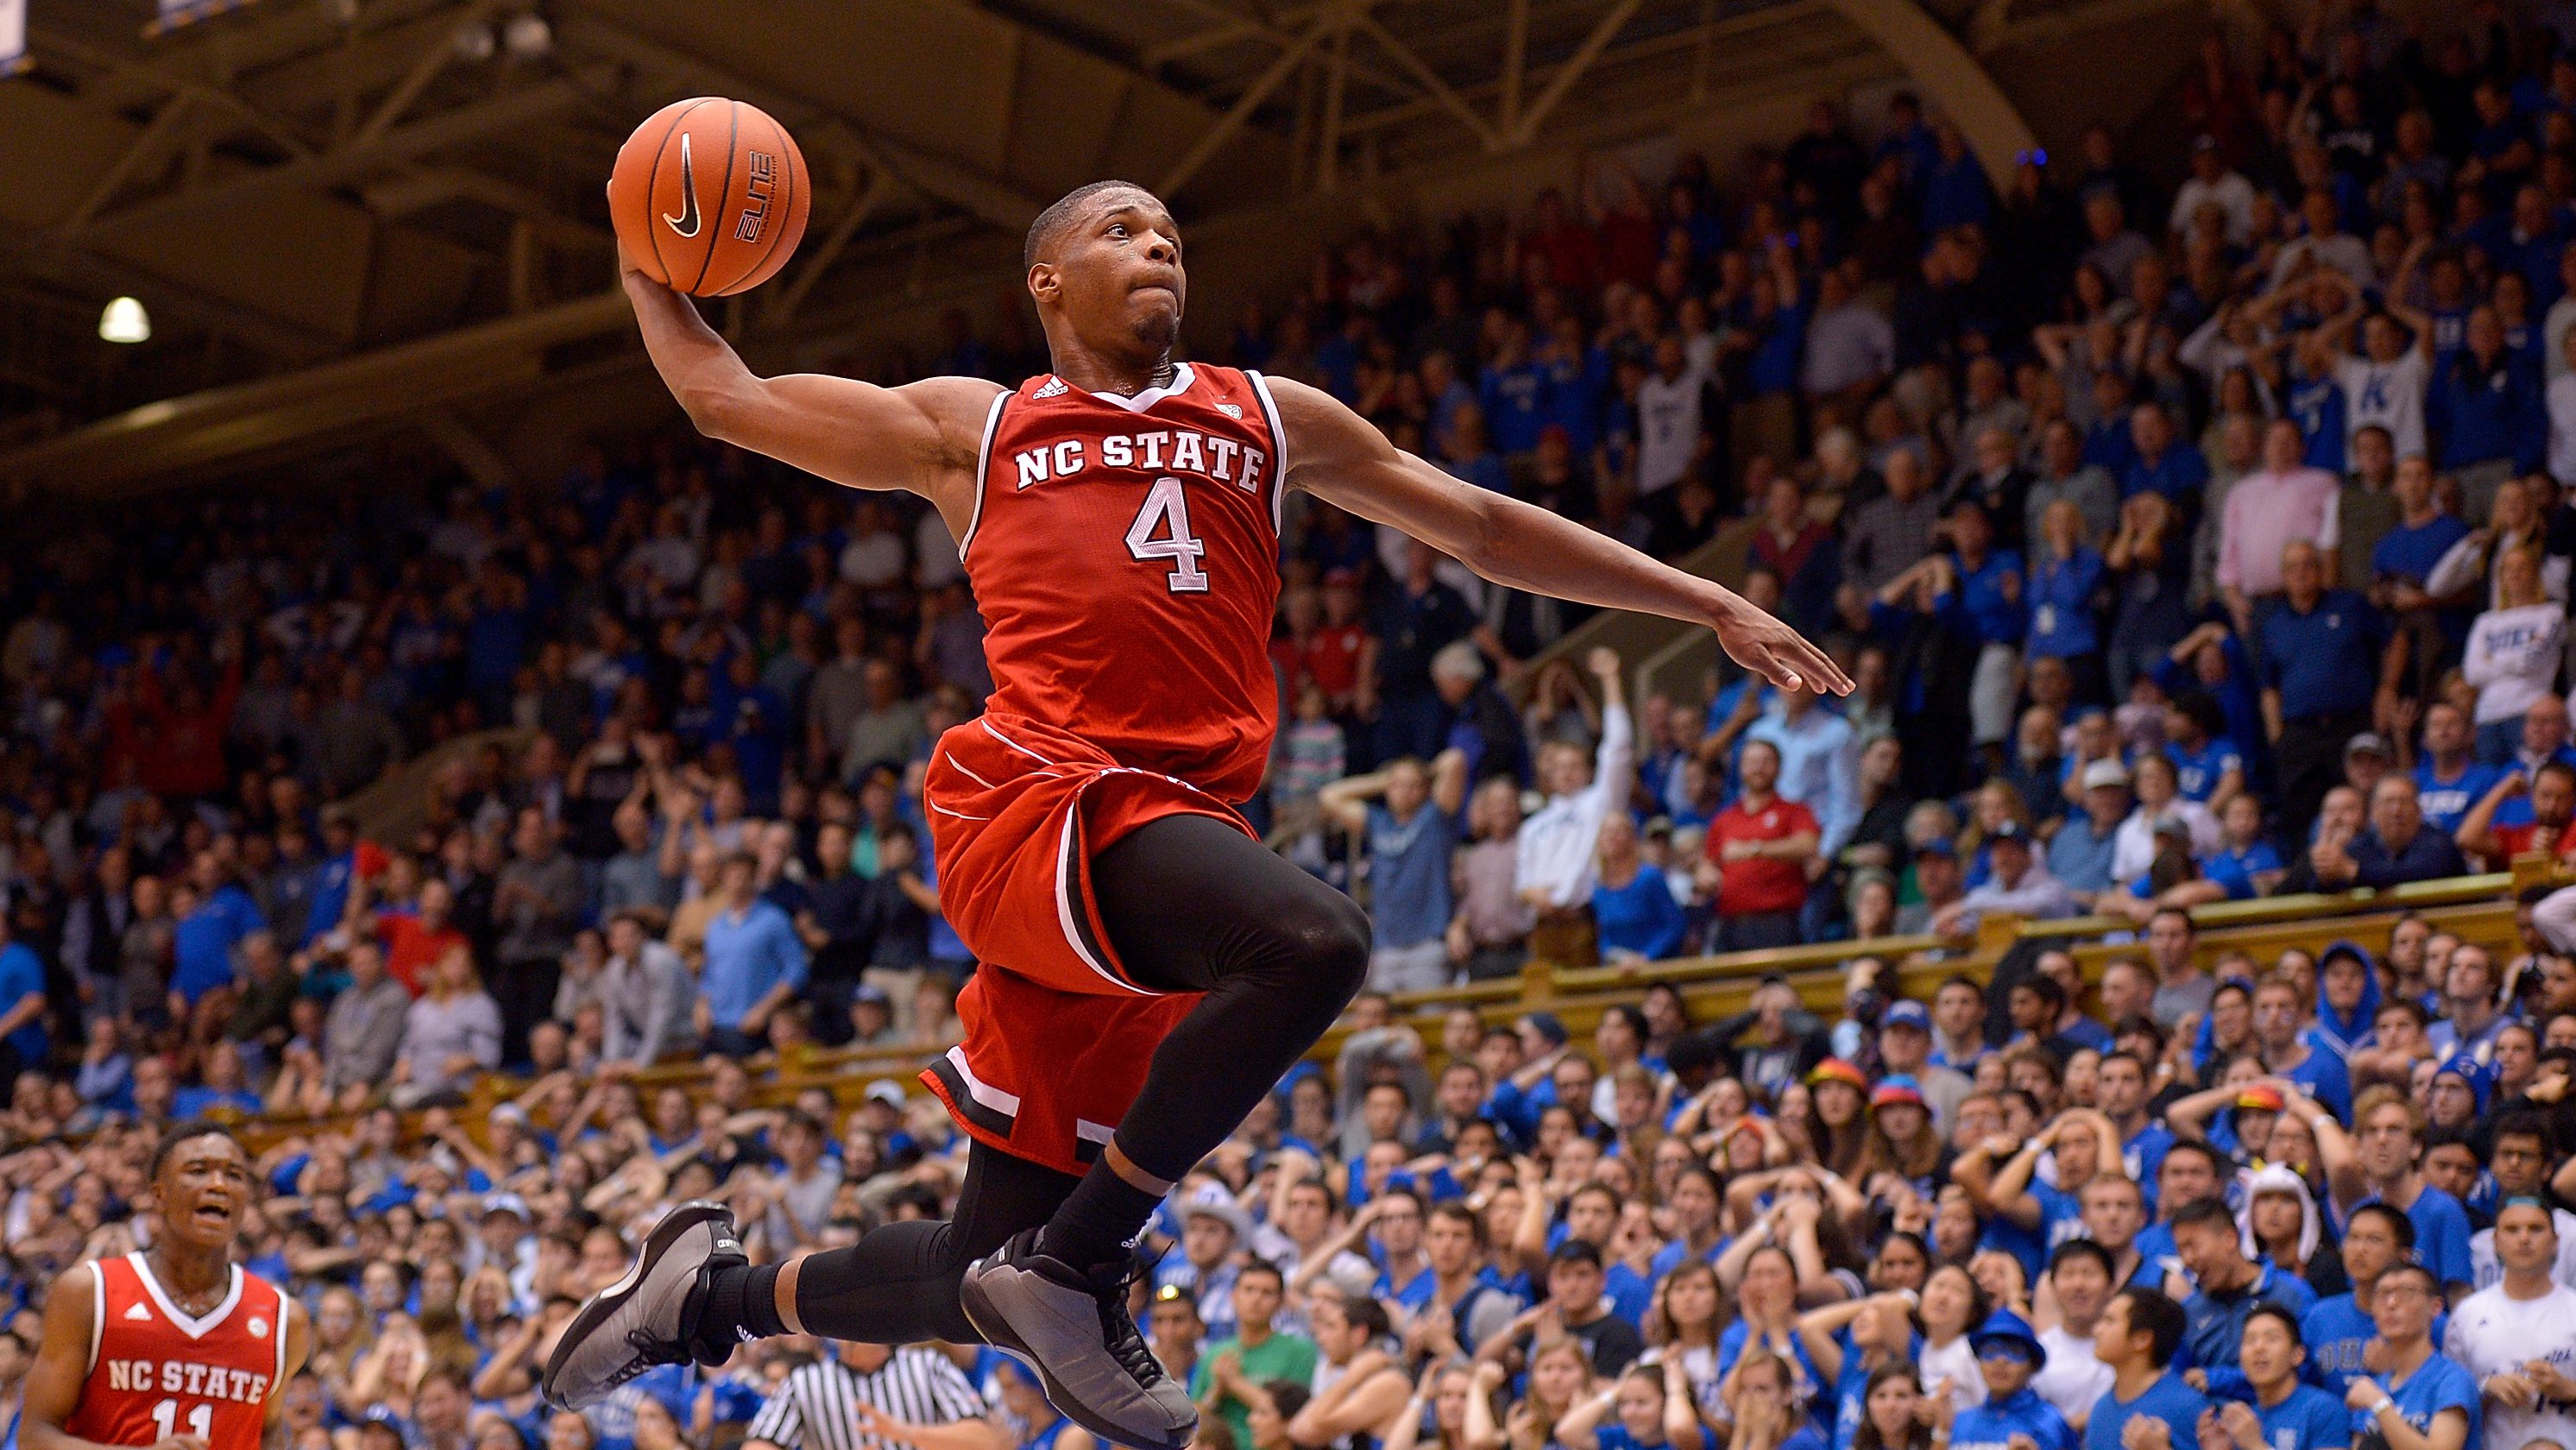 DURHAM, NC - JANUARY 23:  Dennis Smith Jr. #4 of the North Carolina State Wolfpack drives in for a dunk as time expires during their win against the Duke Blue Devils at Cameron Indoor Stadium on January 23, 2017 in Durham, North Carolina. North Carolina State won 84-82.  (Photo by Grant Halverson/Getty Images)